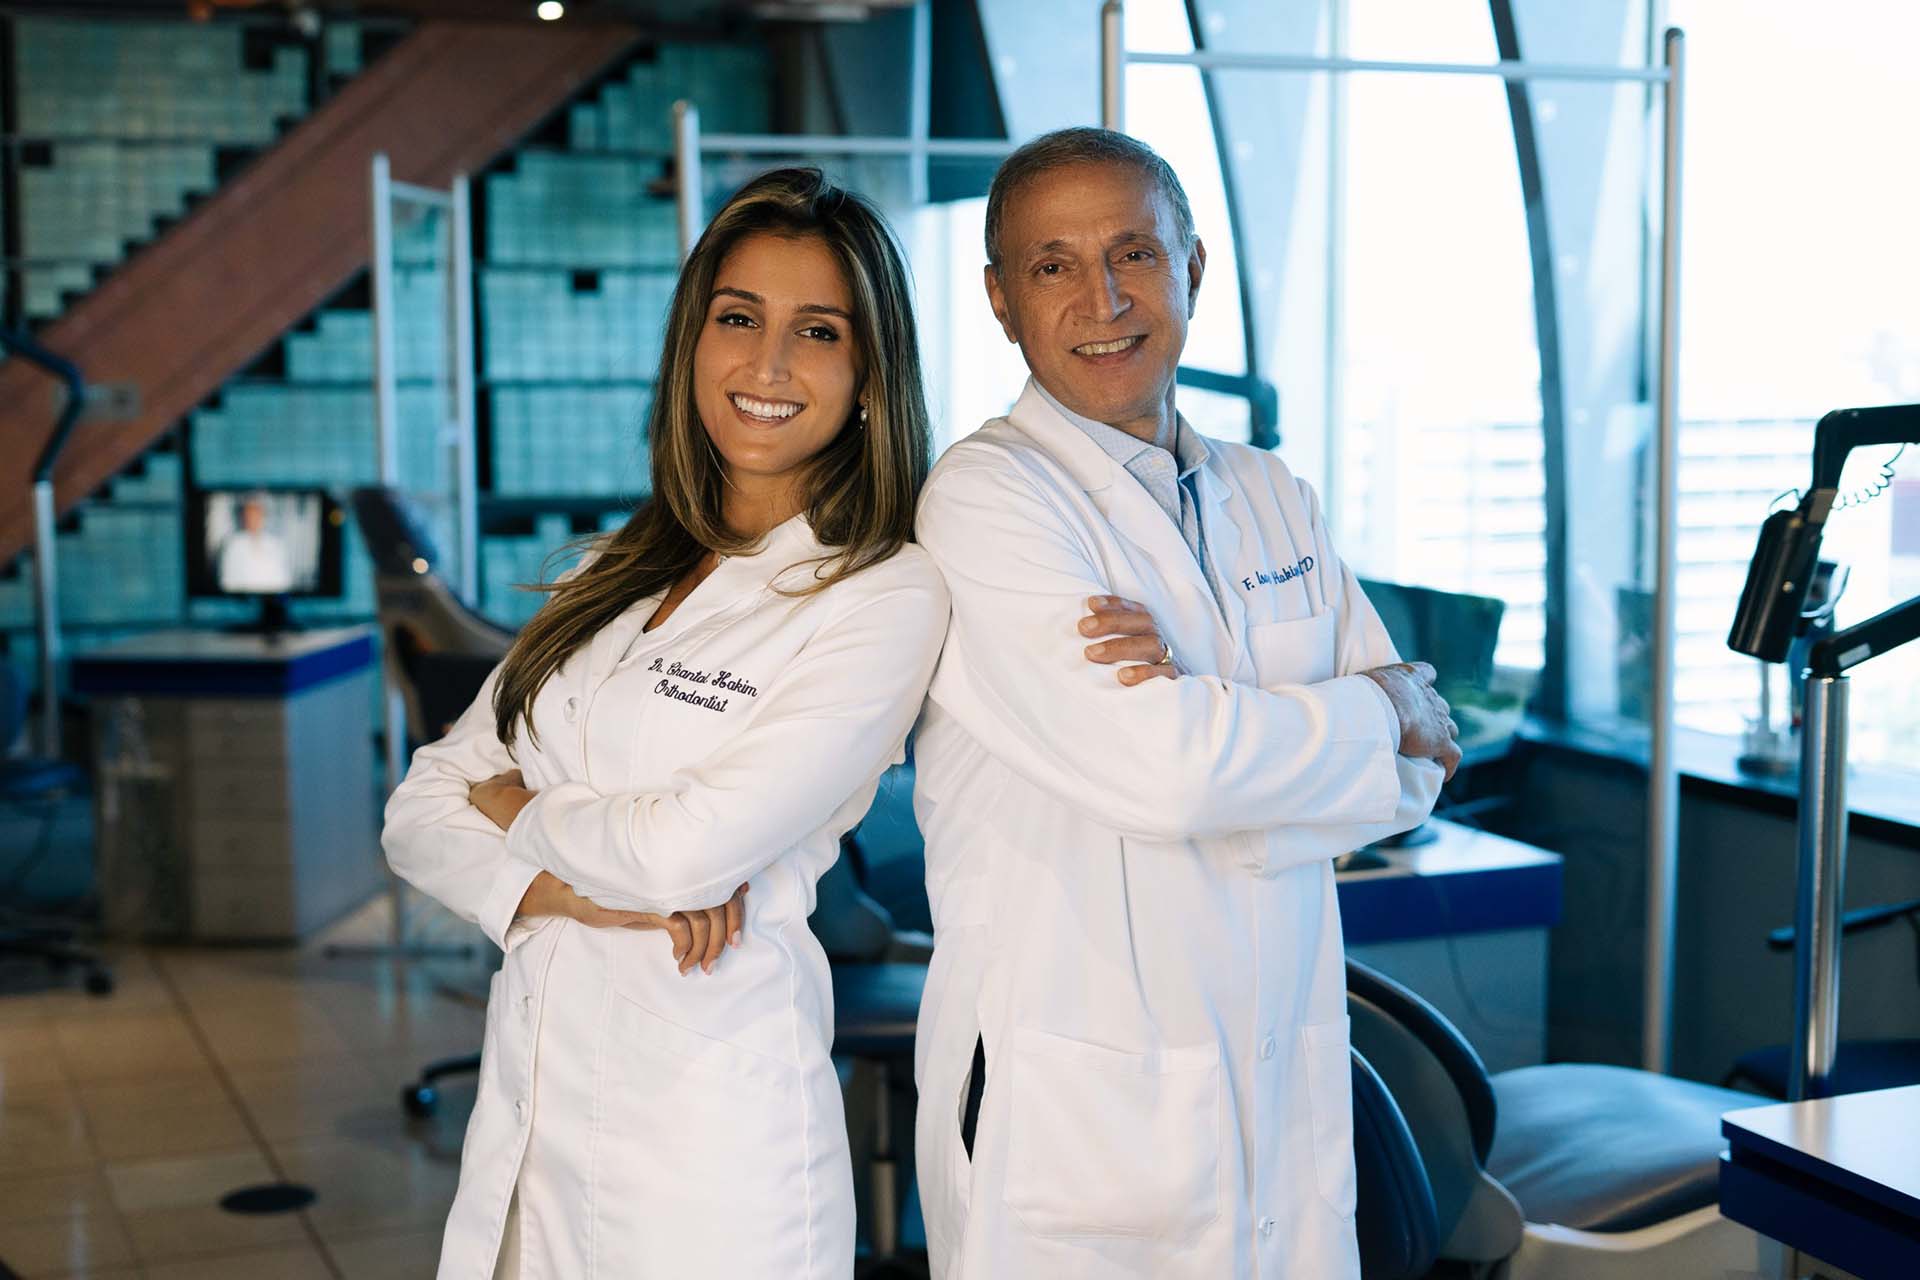 Dr. Chantal Hakim and Dr. F. Isaac Hakim at the Orthospaceship in Los Angeles, a Southern California orthodontic practice serving Universal City.